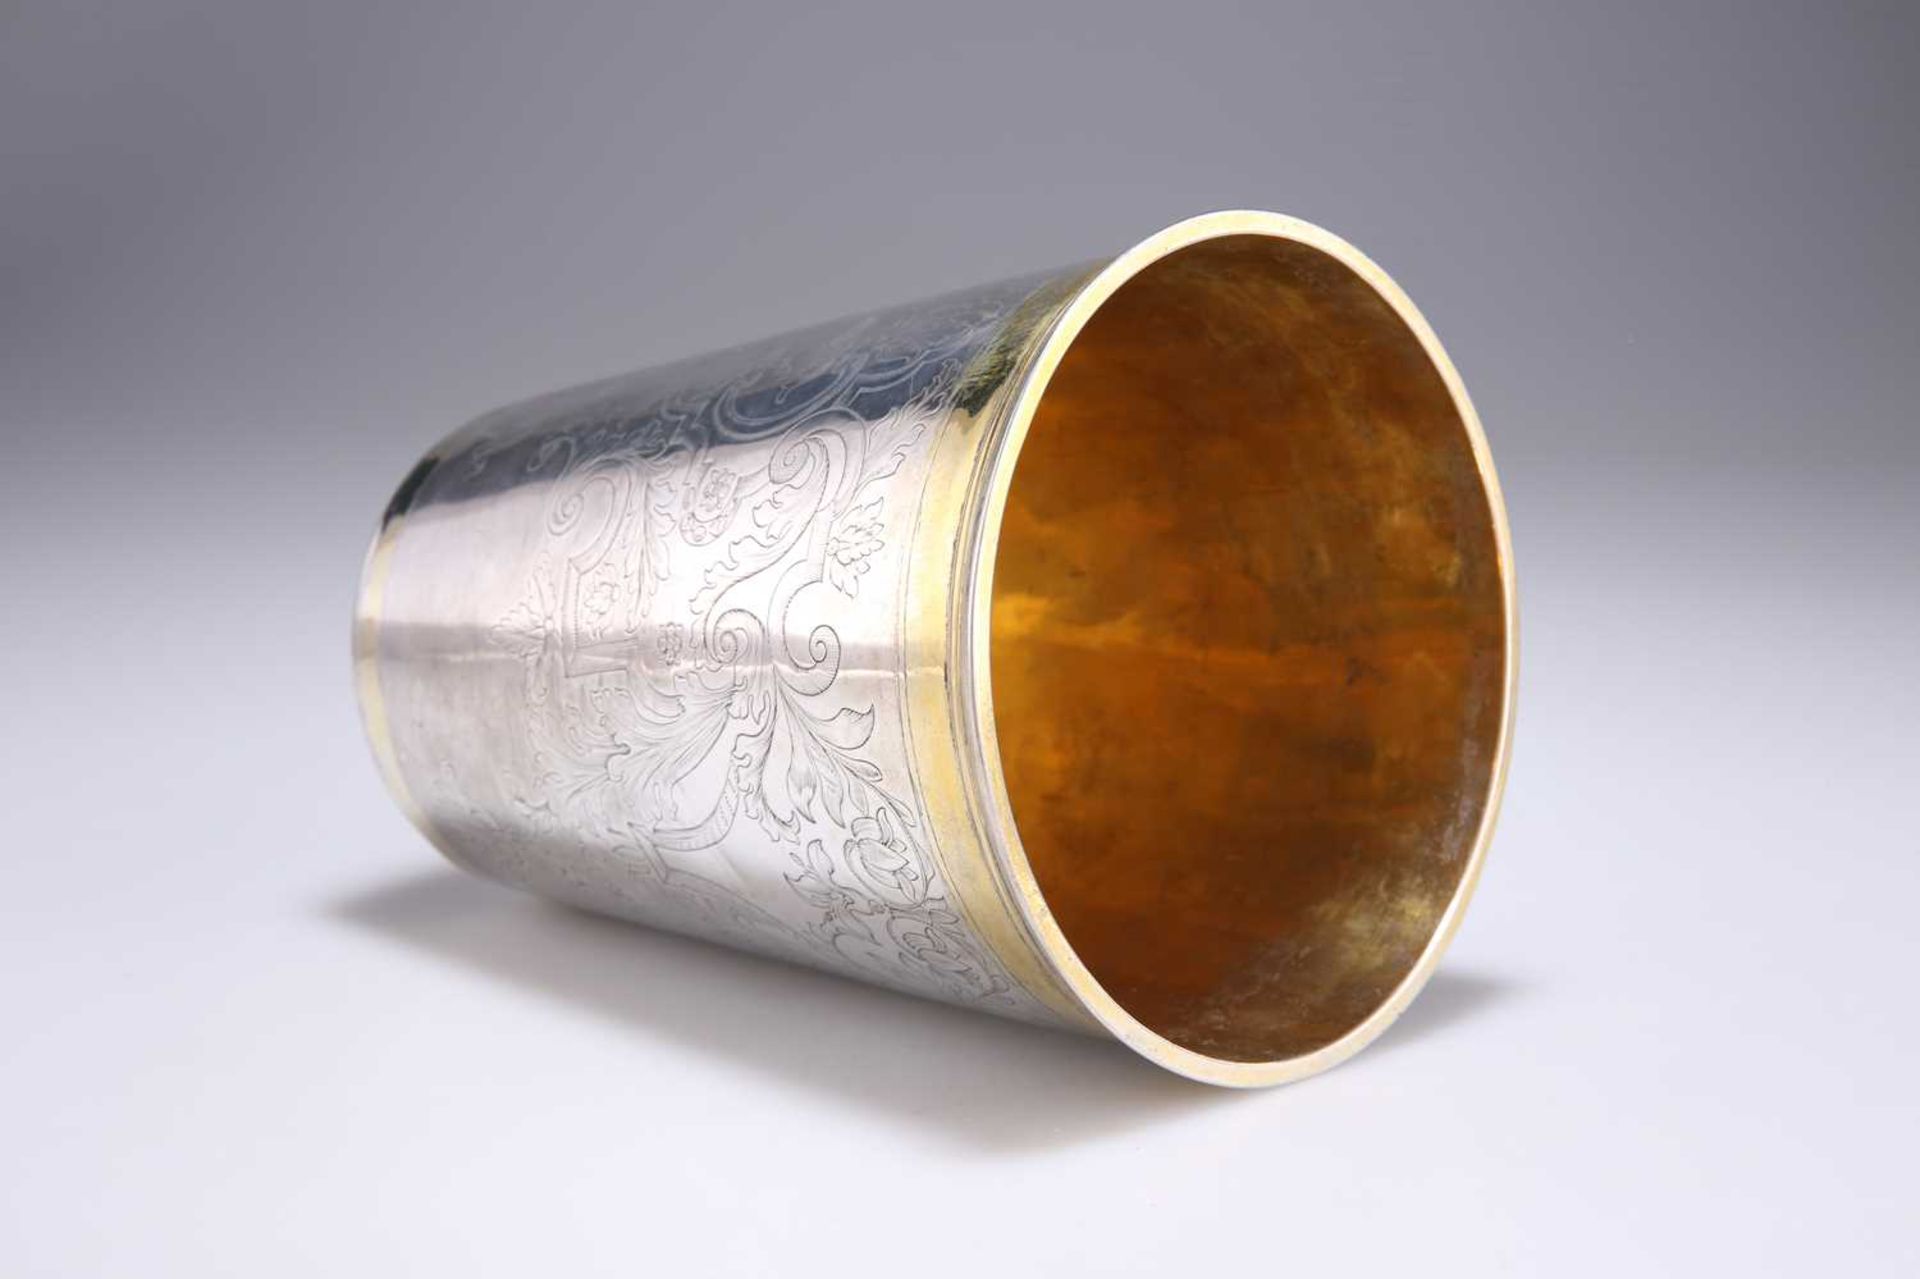 A LARGE 18TH CENTURY RUSSIAN PARCEL-GILT SILVER BEAKER - Image 4 of 6